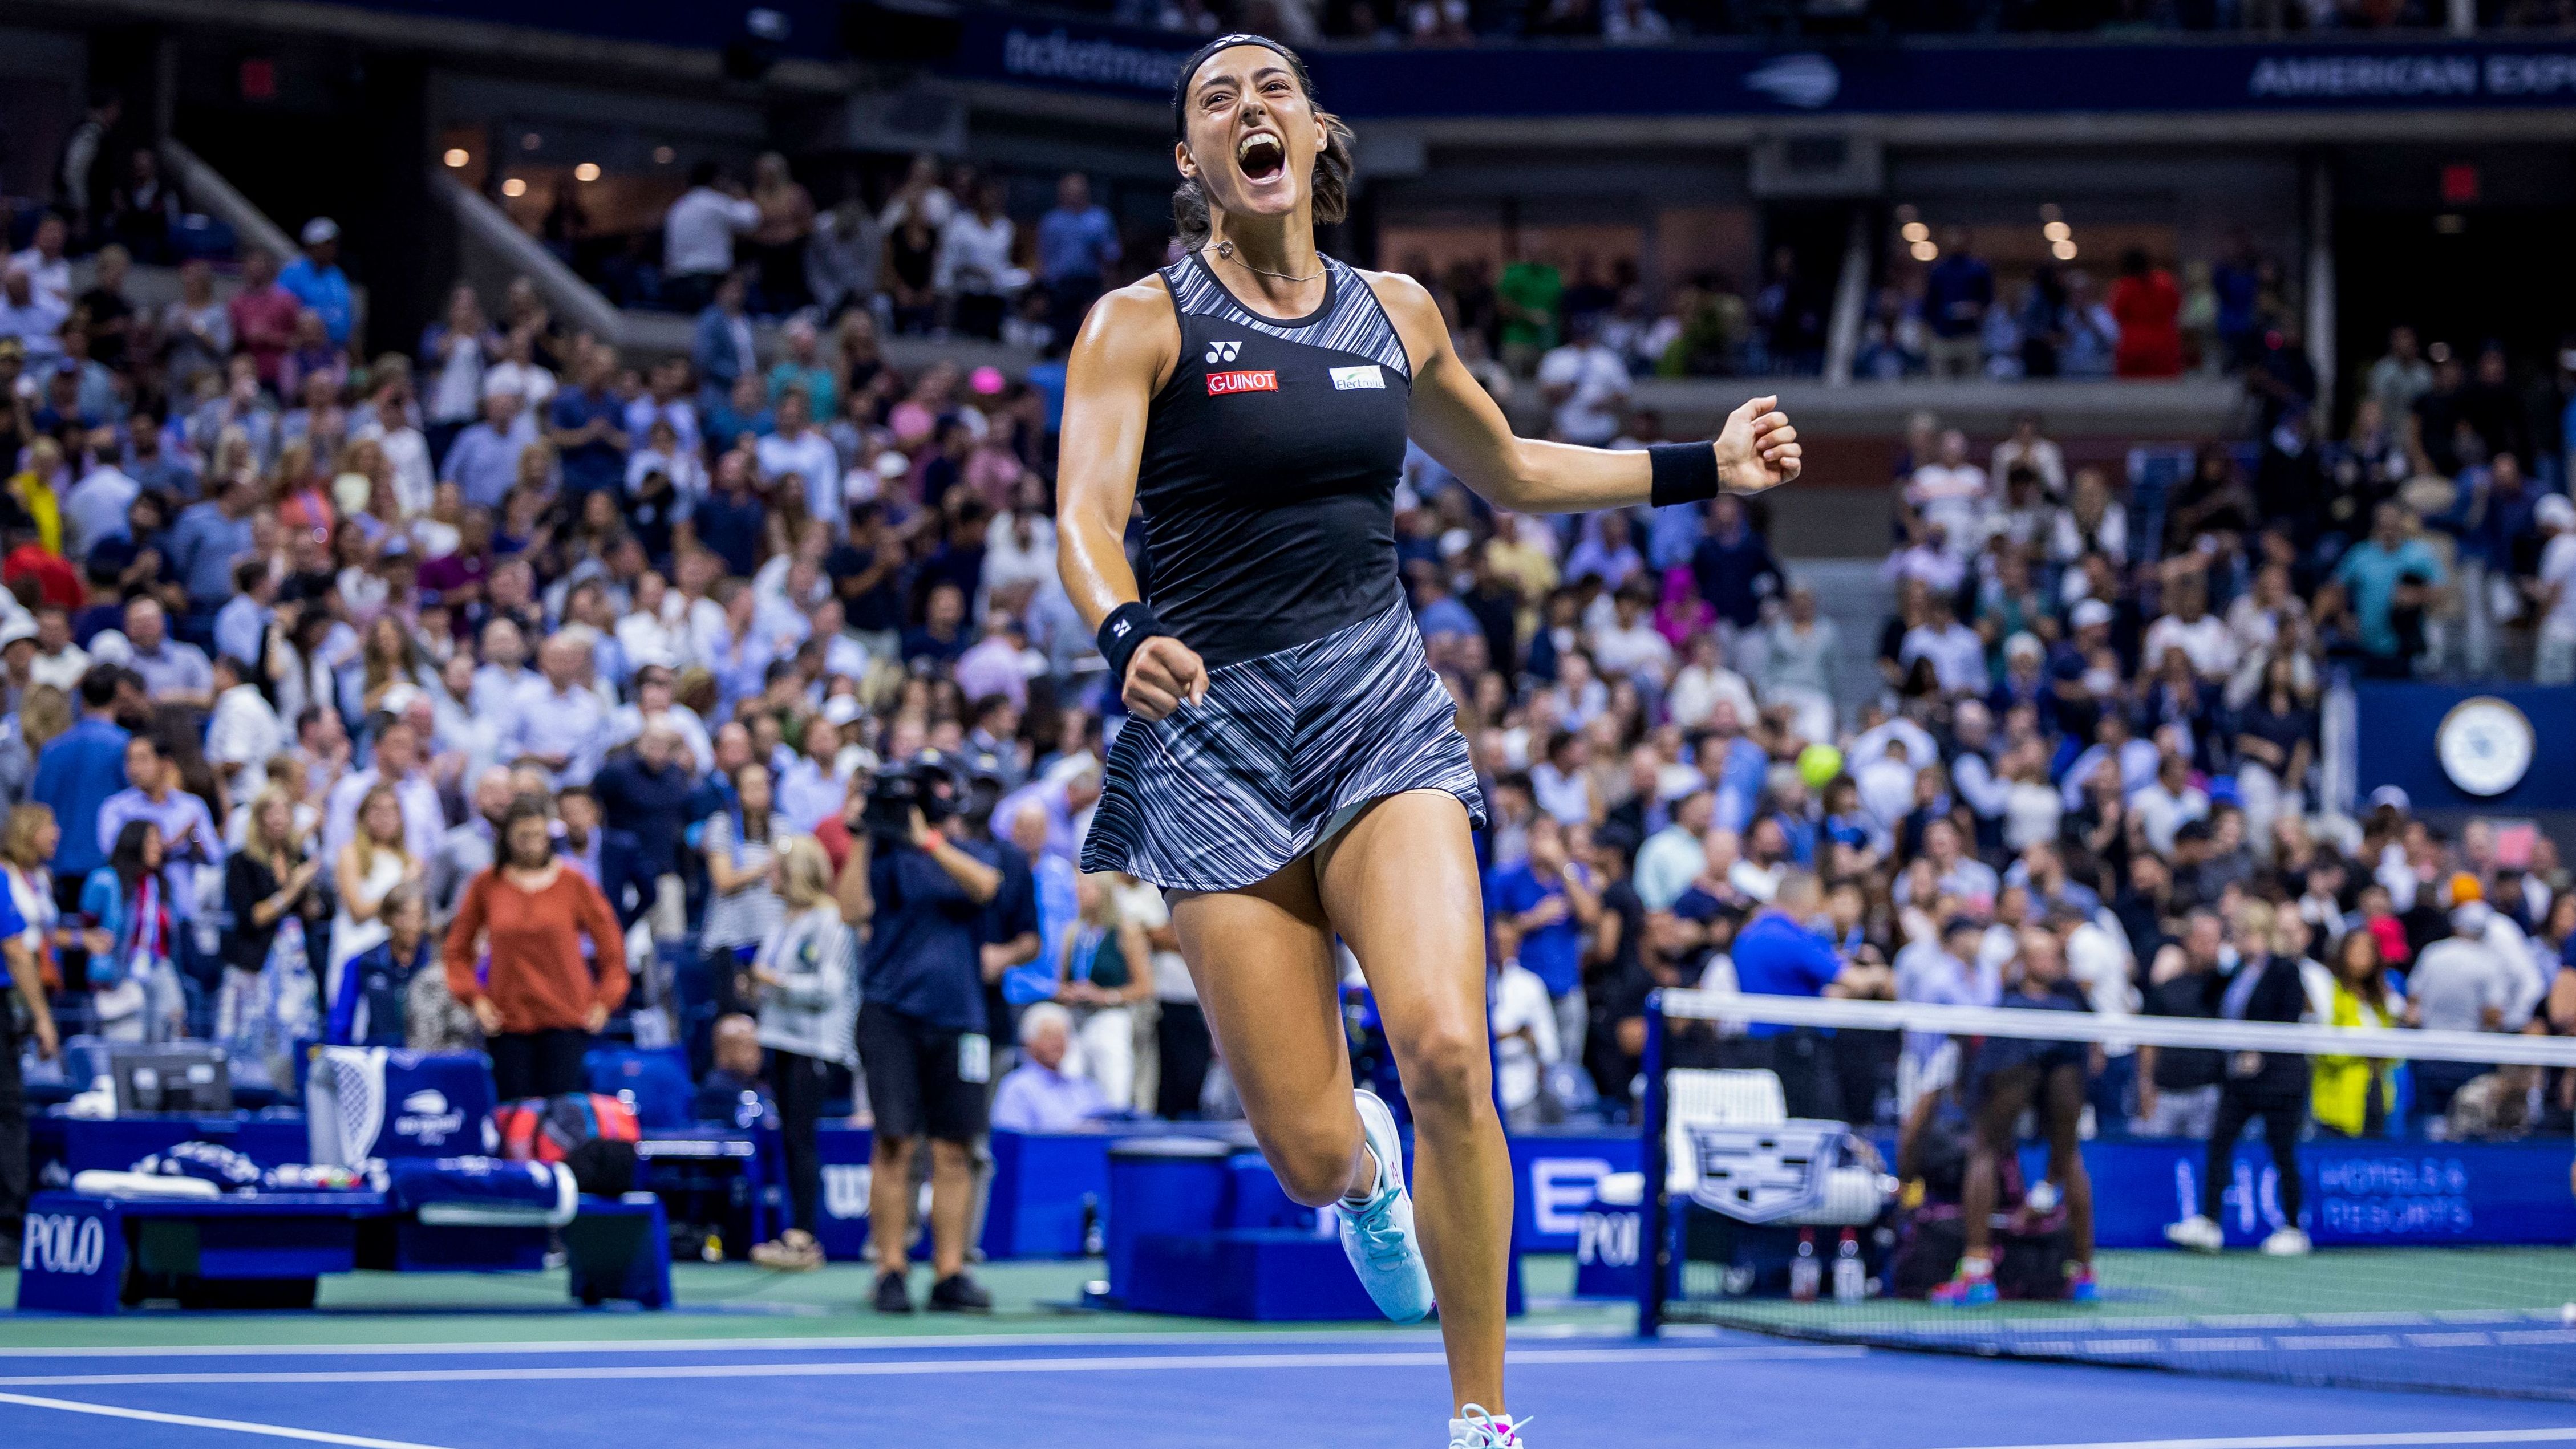 French tennis player Caroline Garcia celebrates after defeating Coco Gauff in the US Open quarterfinals on Tuesday, September 6.